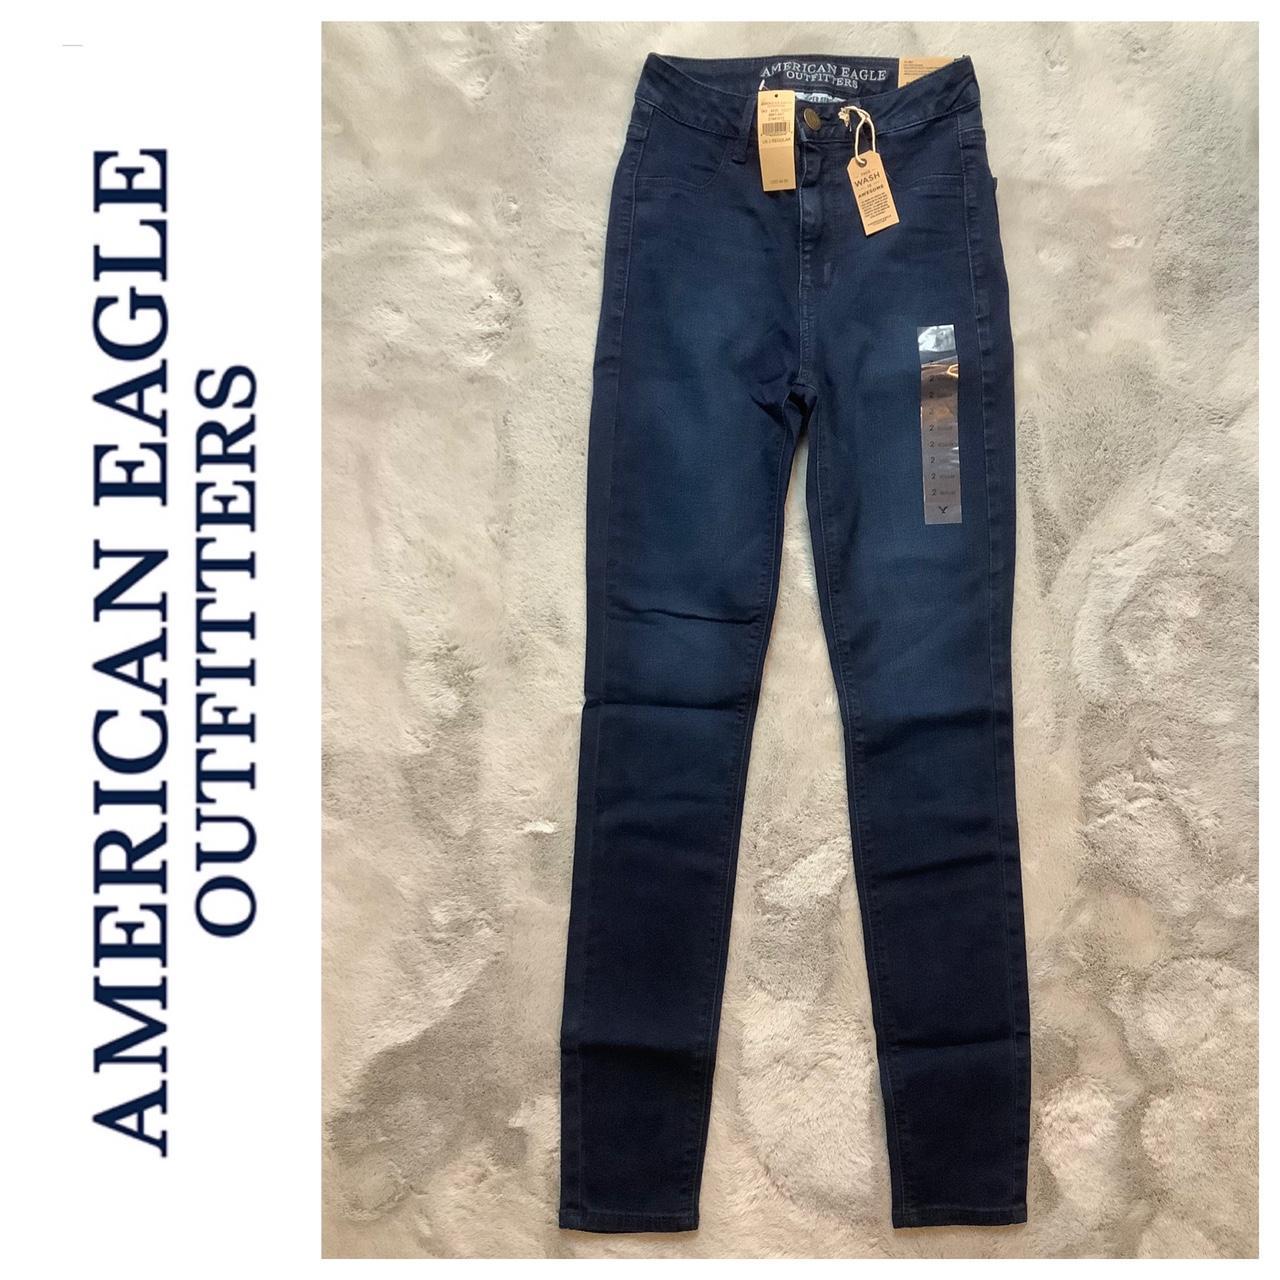 American Eagle Outfitters super stretch - Depop